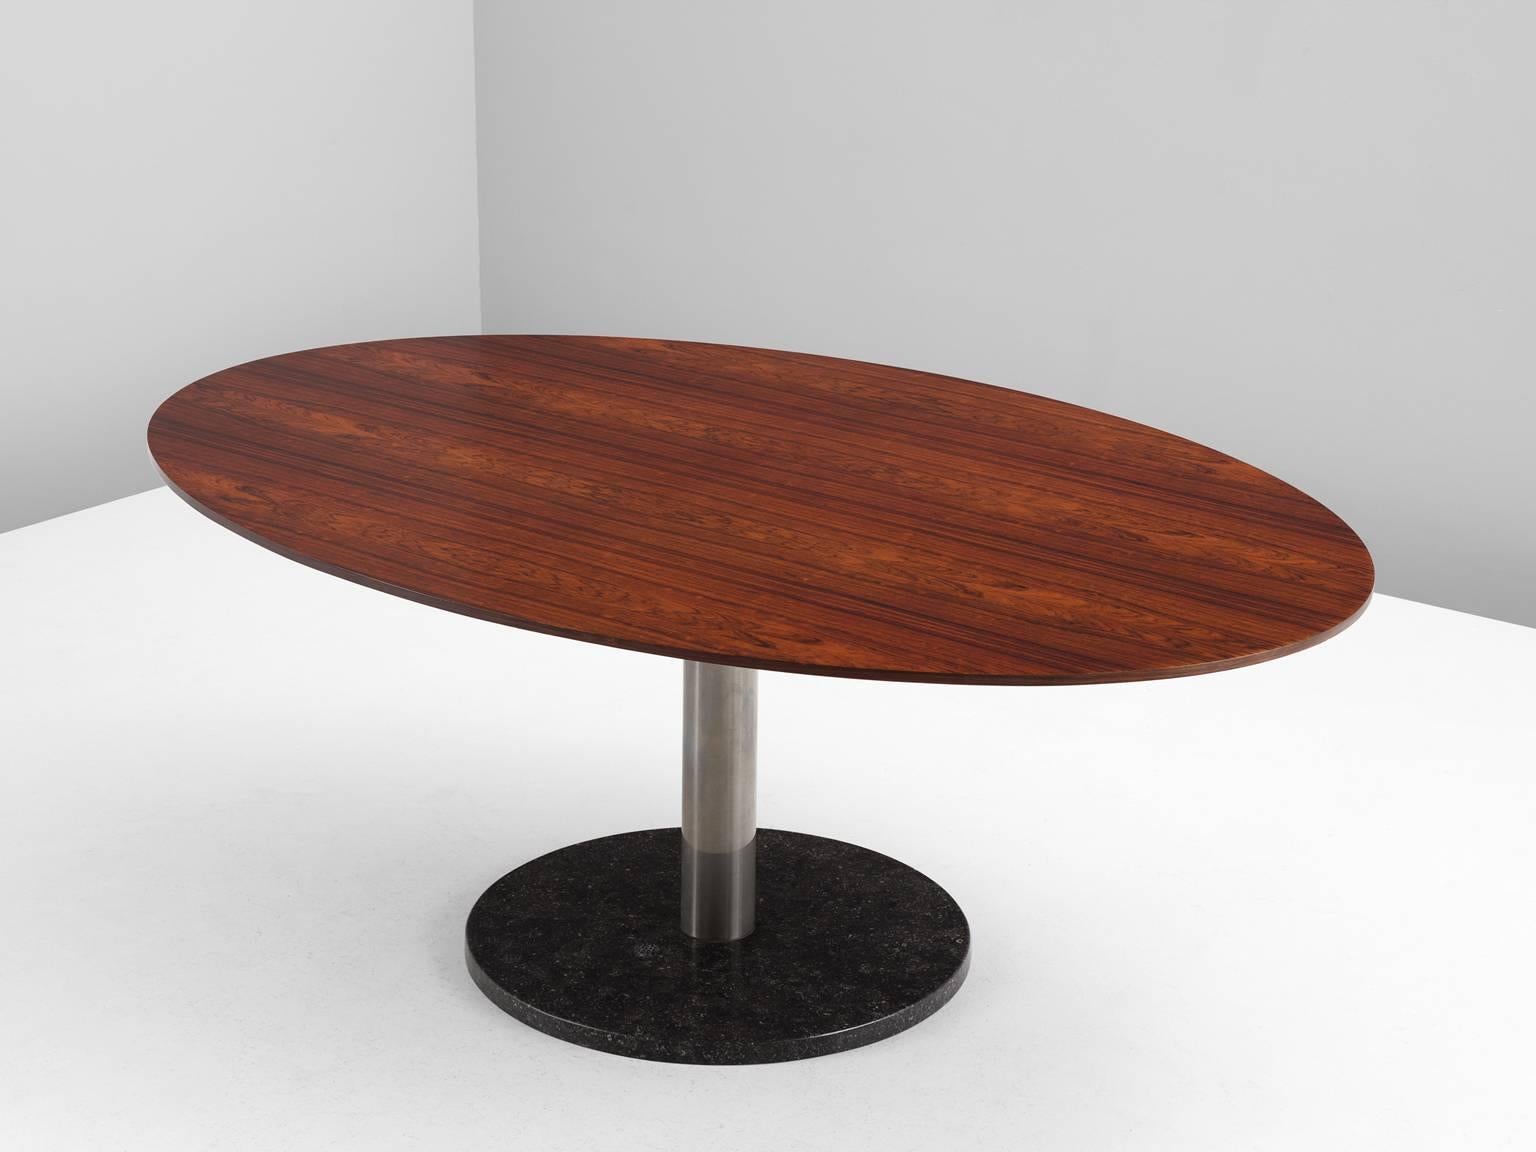 Dining table, in rosewood, metal and marble, by Alfred Hendrickx for Belform, Belgium, 1960s.

Oval rosewood dining room table with magnificent grain in the rosewood veneer on an chromed pedestal with black marble base. This table is designed by